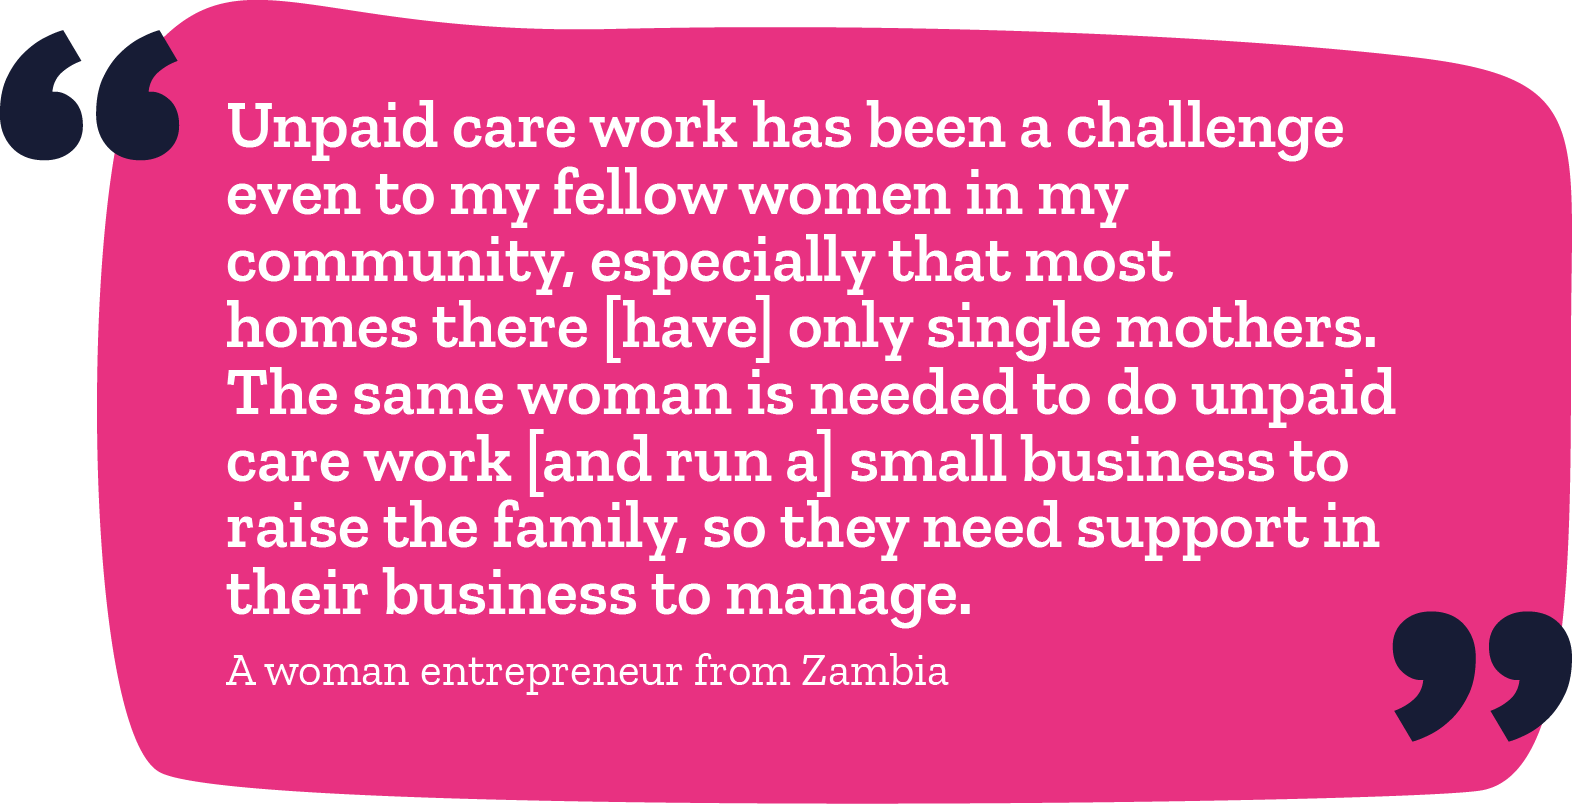 "Unpaid care work has been a challenge even to my fellow women in my community, especially that most homes there have only single mothers. The same woman is needed to do unpaid care work and run a small business to raise a family, so they need support in their business to manage." -A woman entrepreneur from Zambia